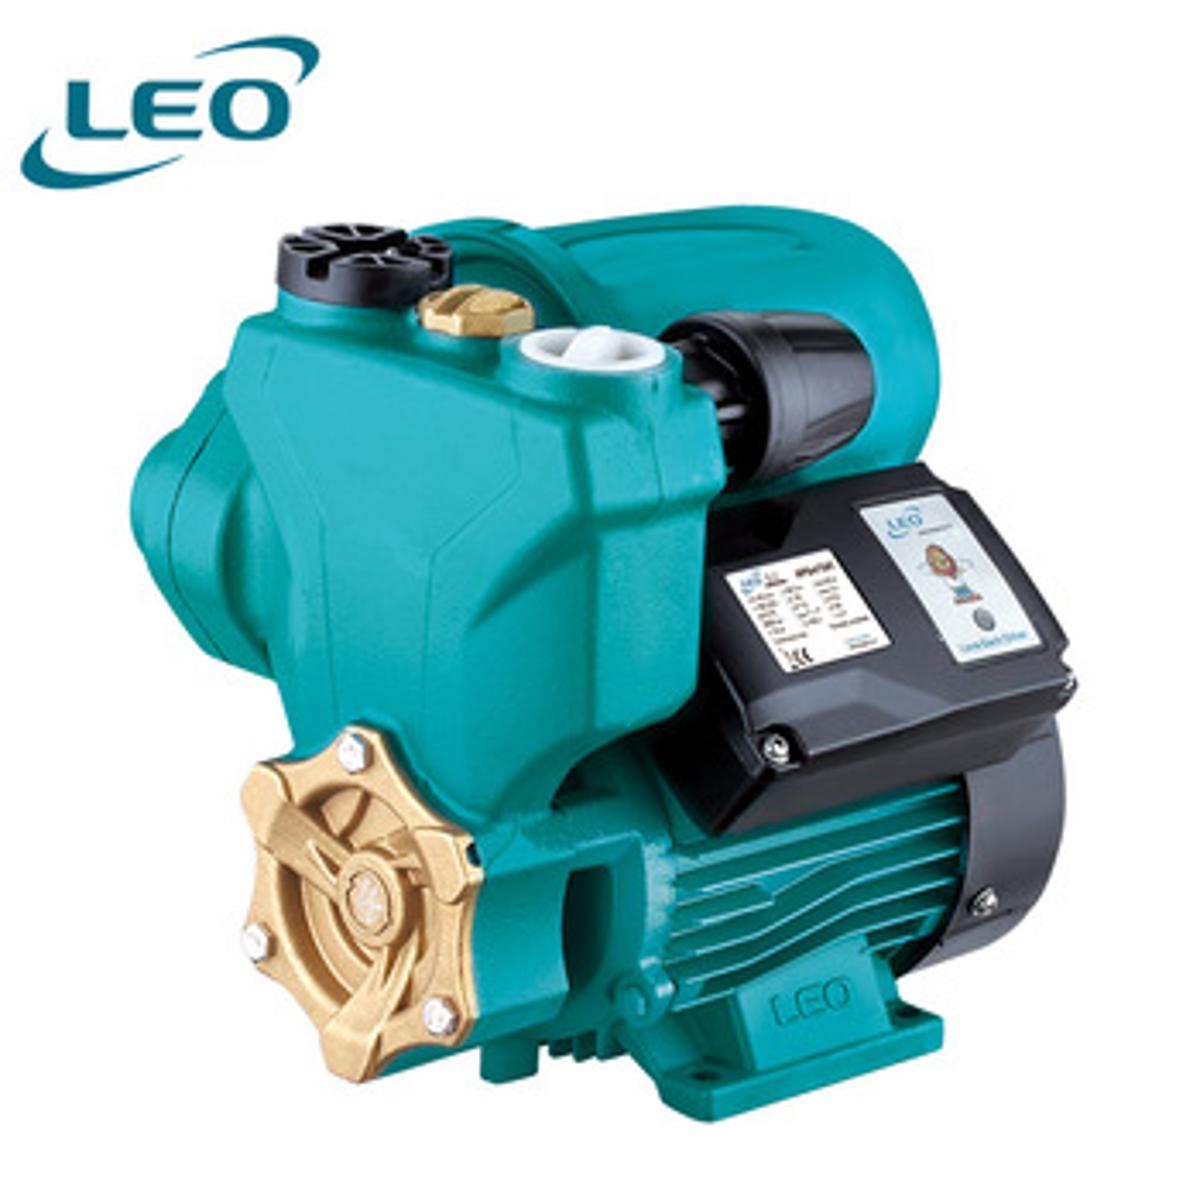 LEO - APSM-75AT- 750W - 1.0HP - 180V~220V SINGLE PHASE Clean Water AUTOMATIC SELF PRIMING PERIPHERAL - VORTEX Pump - European STANDARD